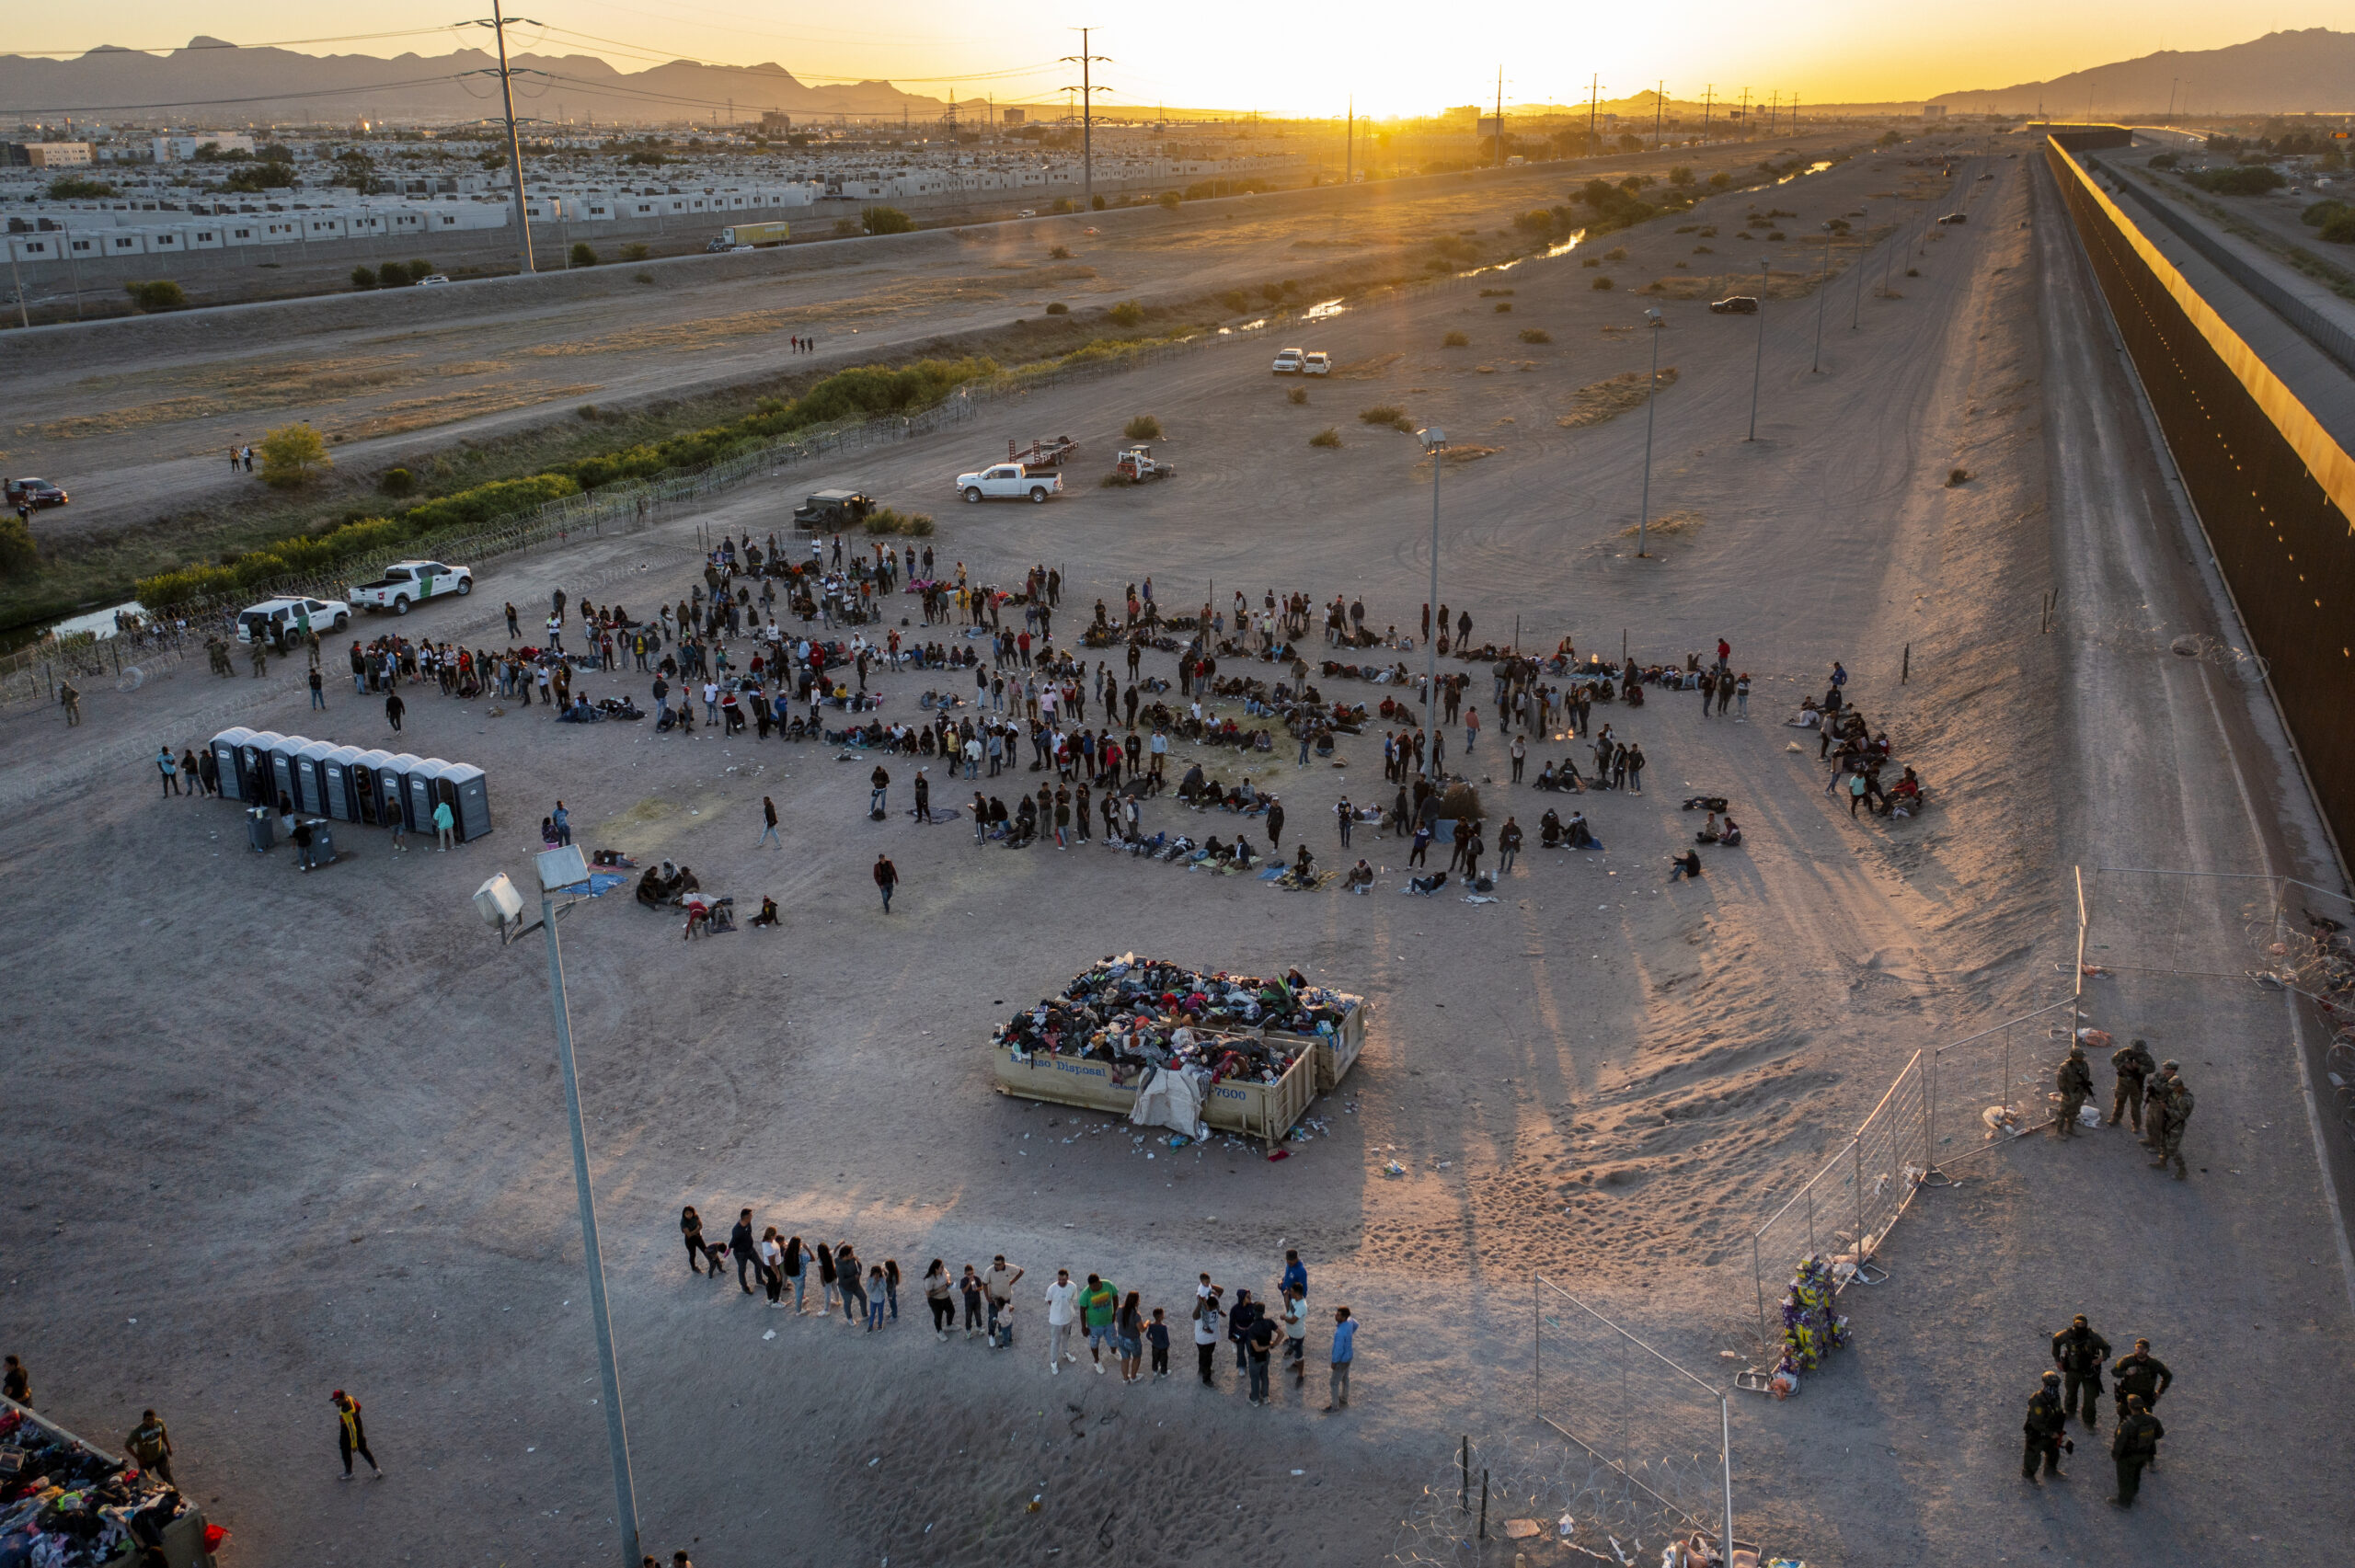 As the sun sets, migrants wait outside a gate in the border fence to enter into El Paso, Texas, to ...